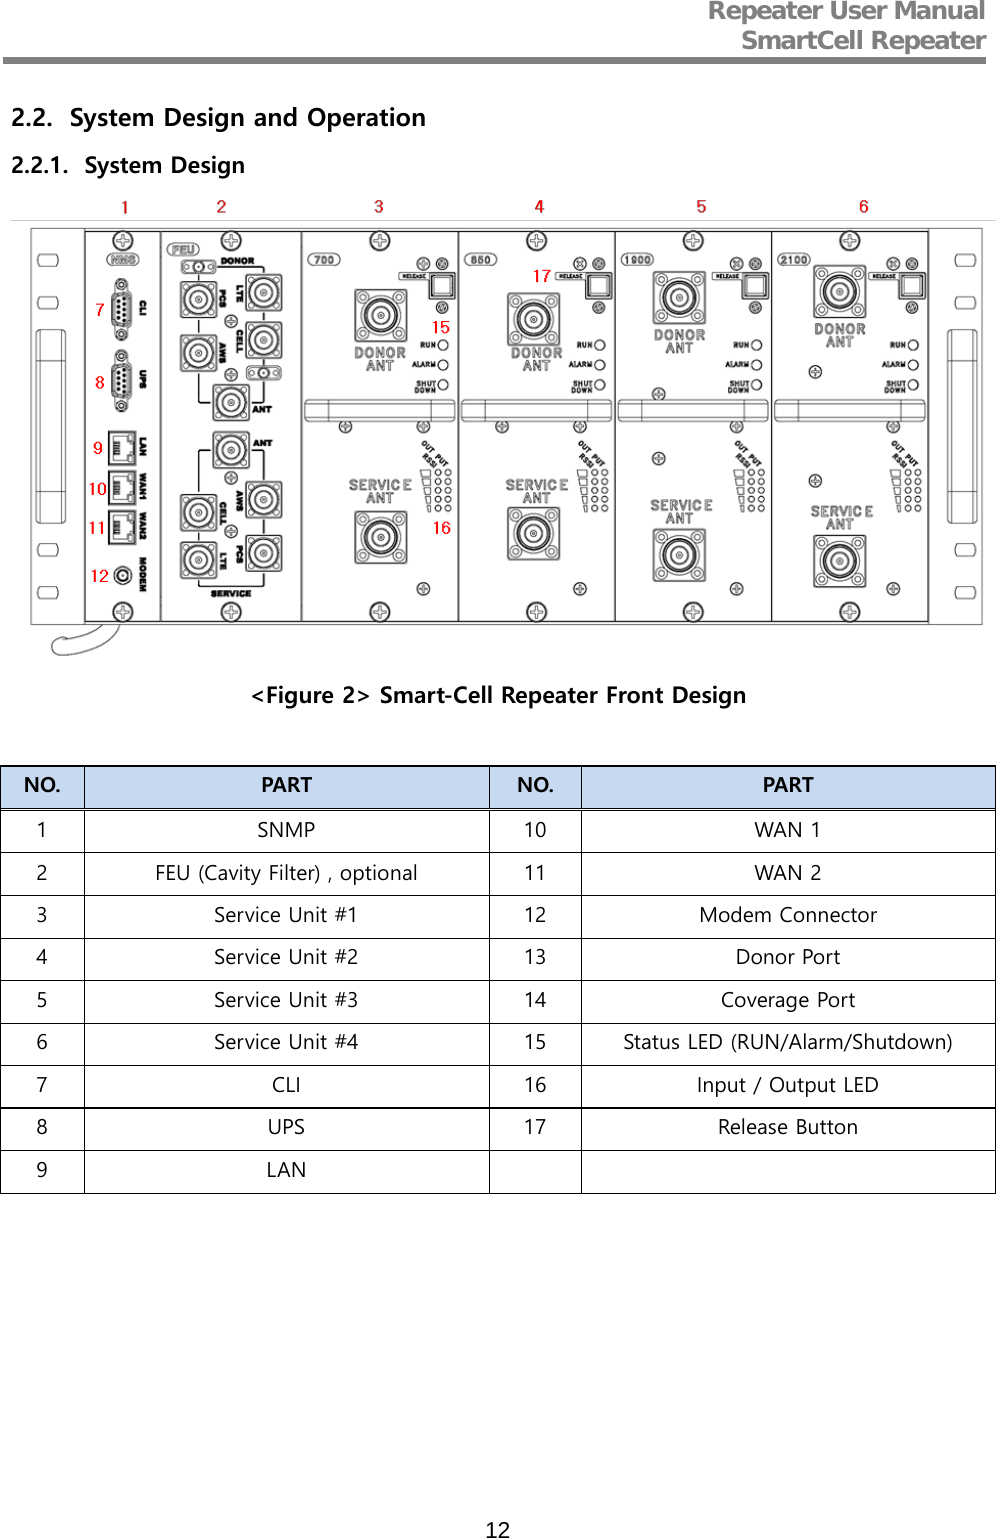 Repeater User Manual  SmartCell Repeater   12 2.2. System Design and Operation 2.2.1. System Design  &lt;Figure 2&gt; Smart-Cell Repeater Front Design  NO. PART NO. PART 1  SNMP 10 WAN 1 2  FEU (Cavity Filter) , optional 11 WAN 2 3  Service Unit #1 12 Modem Connector 4  Service Unit #2 13 Donor Port 5  Service Unit #3 14 Coverage Port 6  Service Unit #4 15 Status LED (RUN/Alarm/Shutdown) 7  CLI 16 Input / Output LED 8  UPS 17 Release Button 9  LAN       